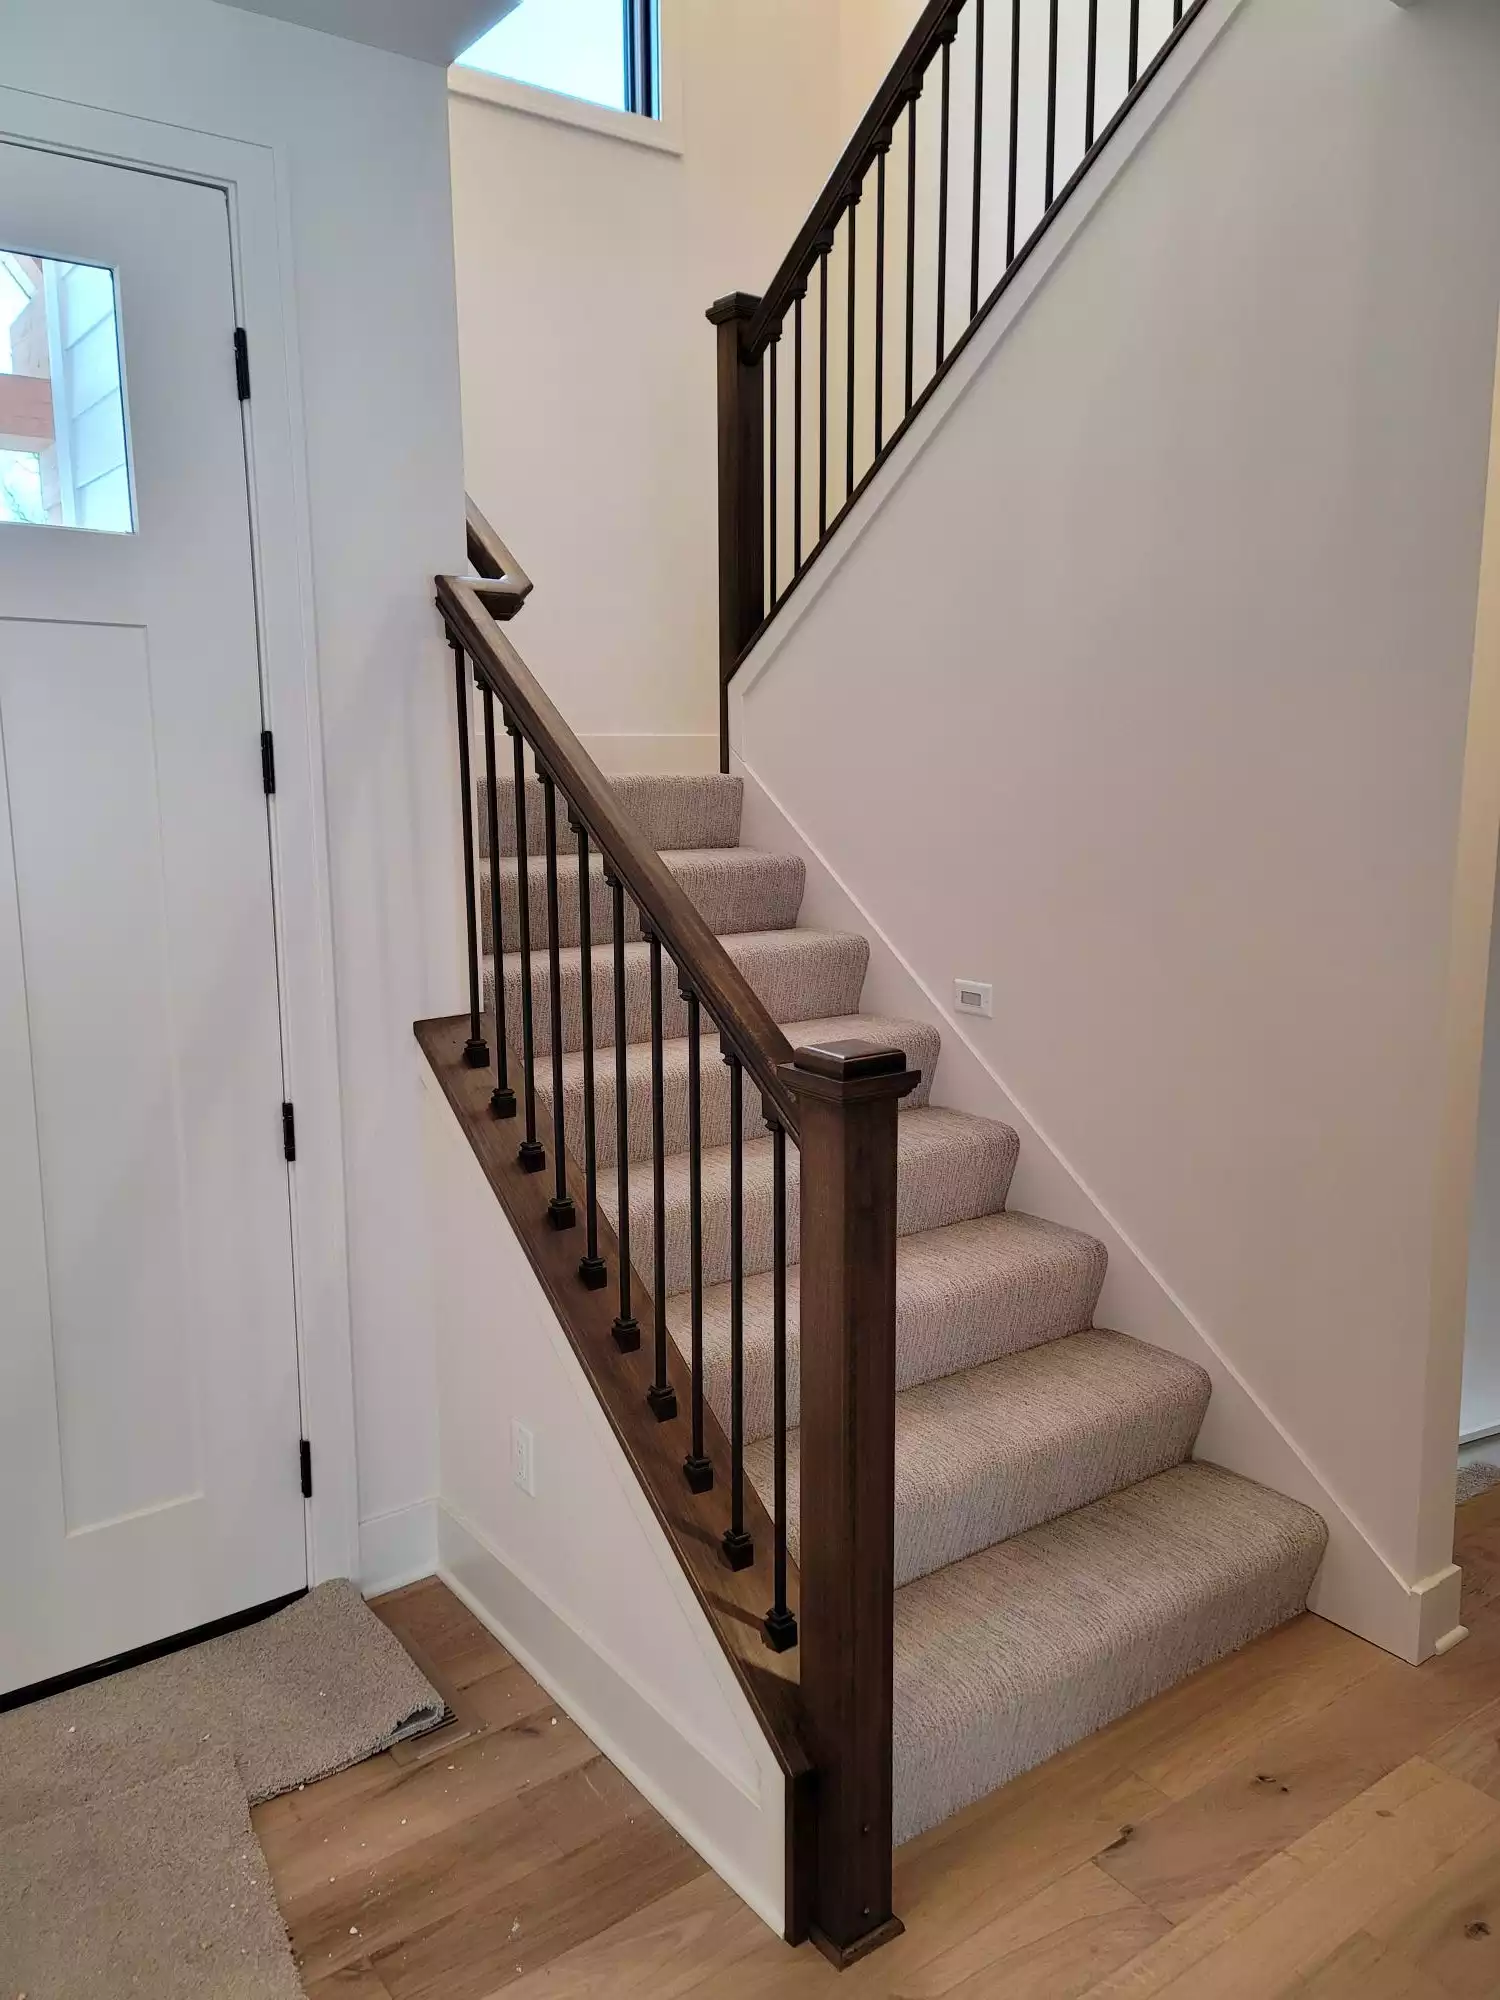 Wood baluster and wrought iron spindles of open staircase